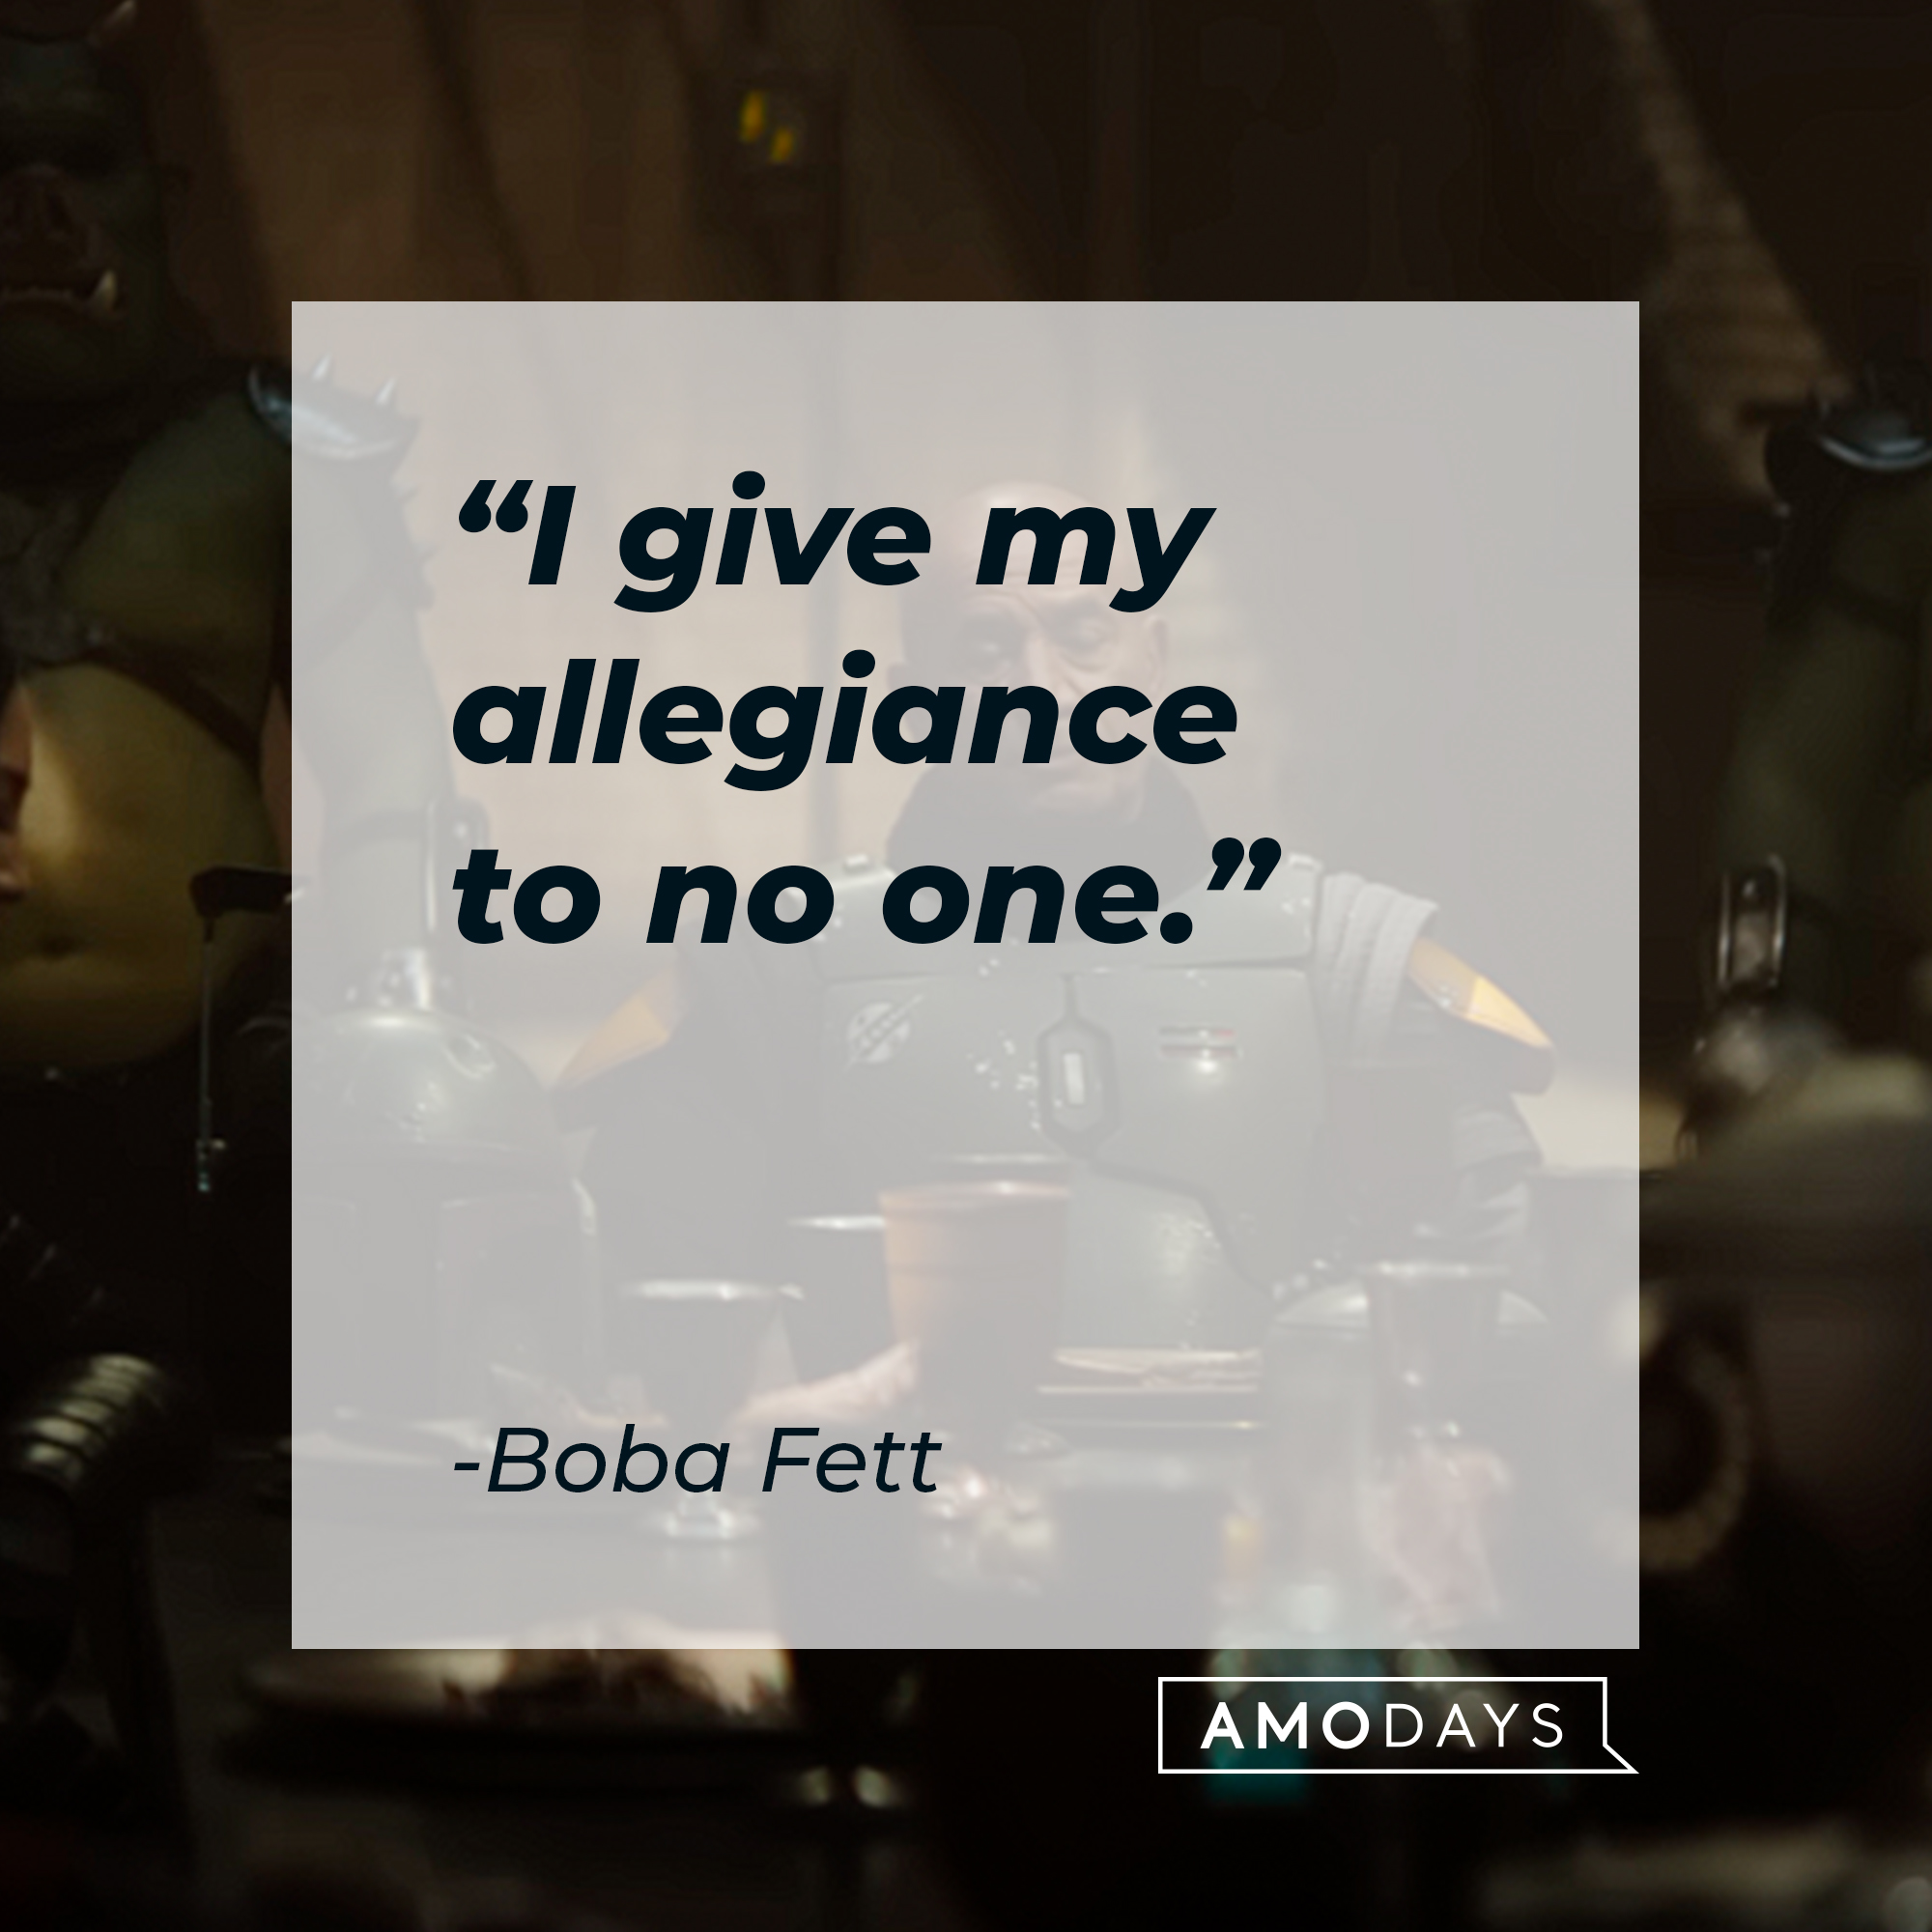 Boba Fett, with his quote: “I give my allegiance to no one.” │ Source: youtube.com/StarWars